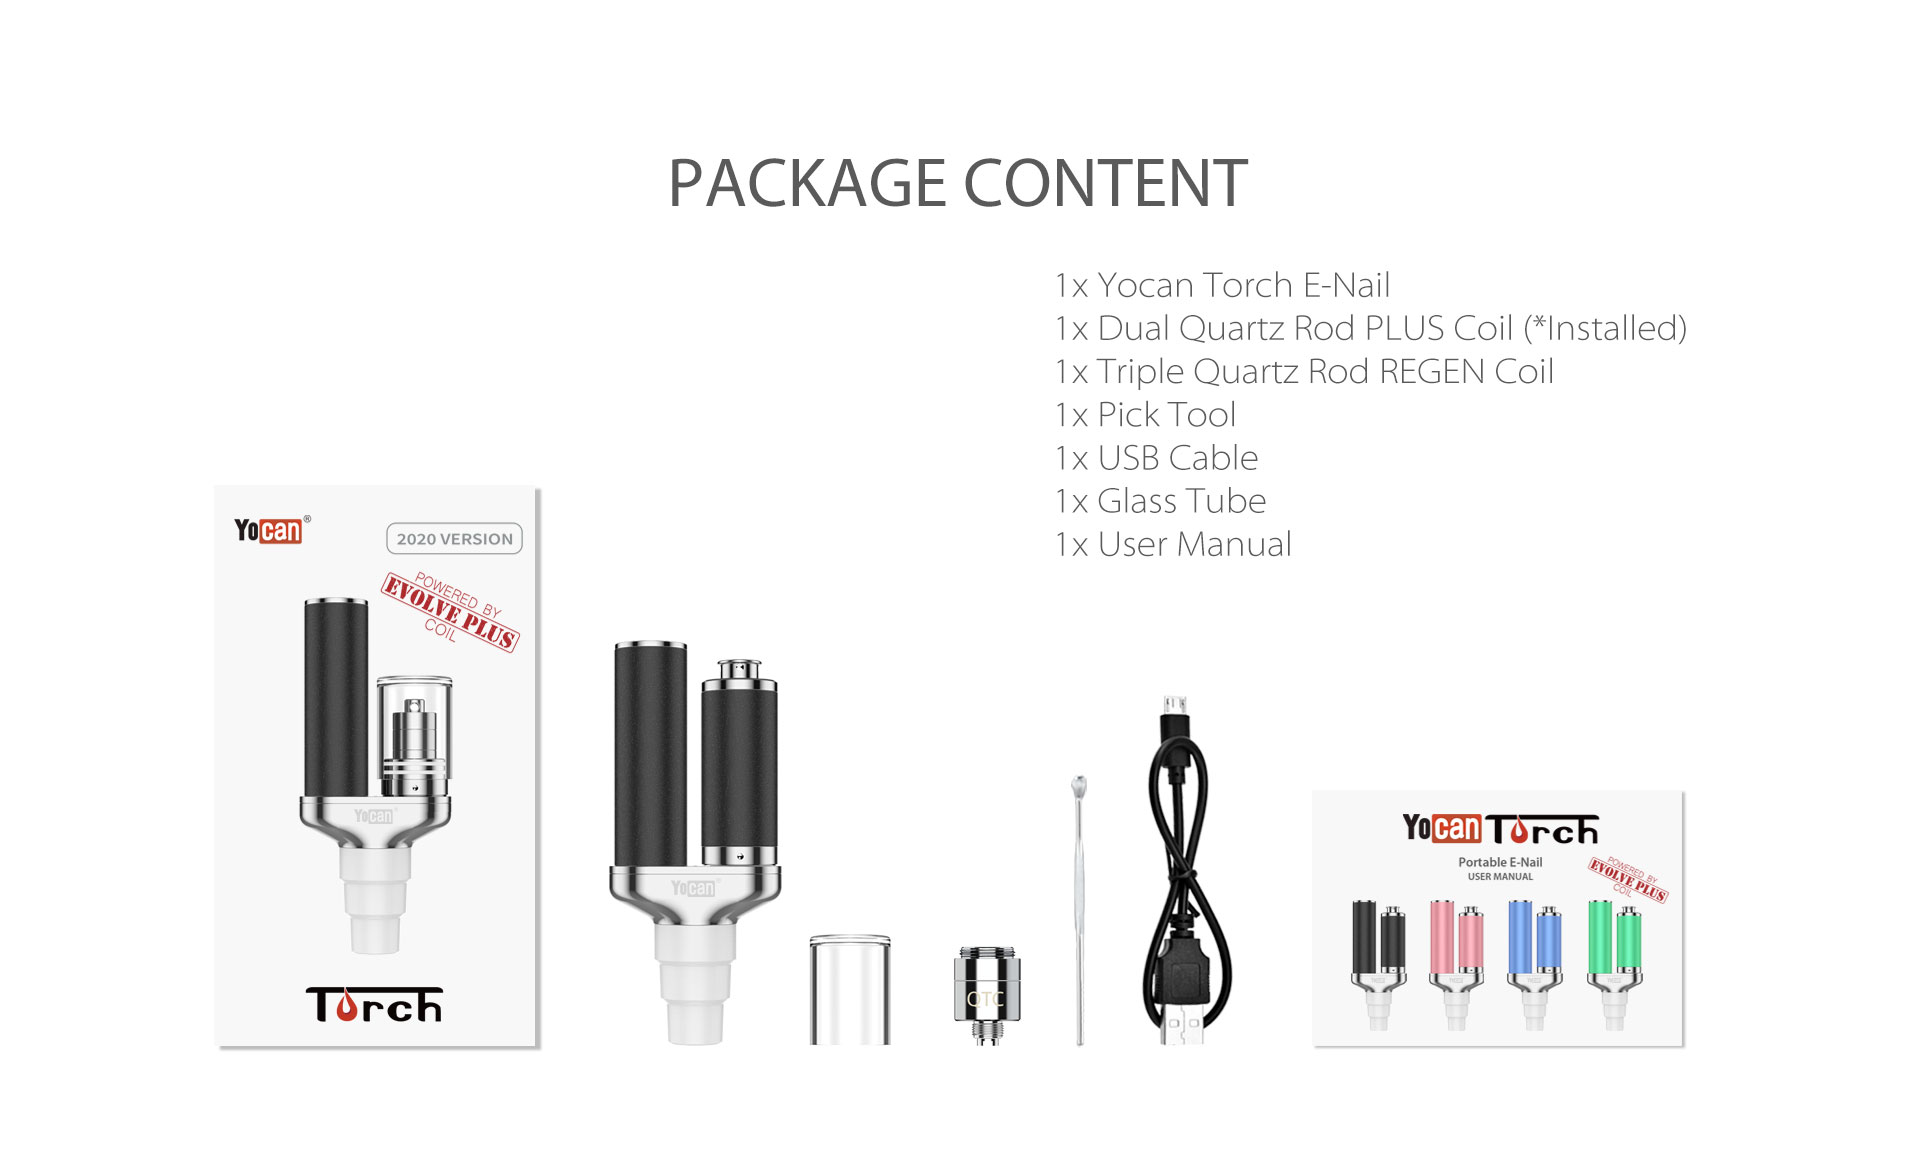 Yocan Torch Enail package content.